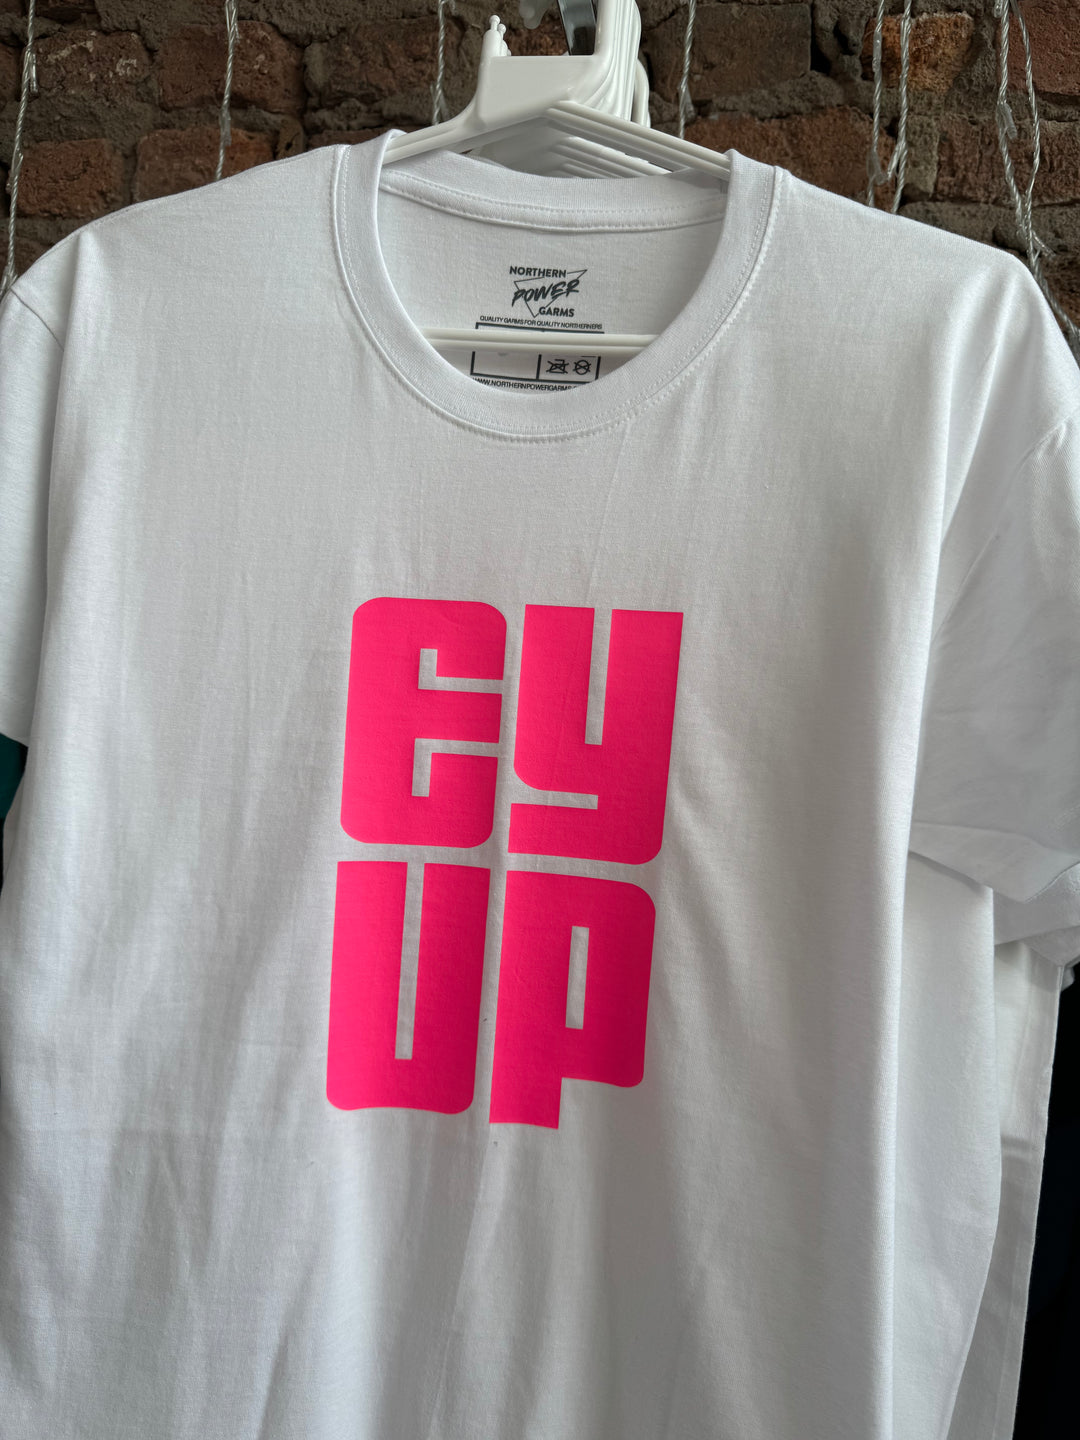 *EY UP Tee (Ready To Ship)